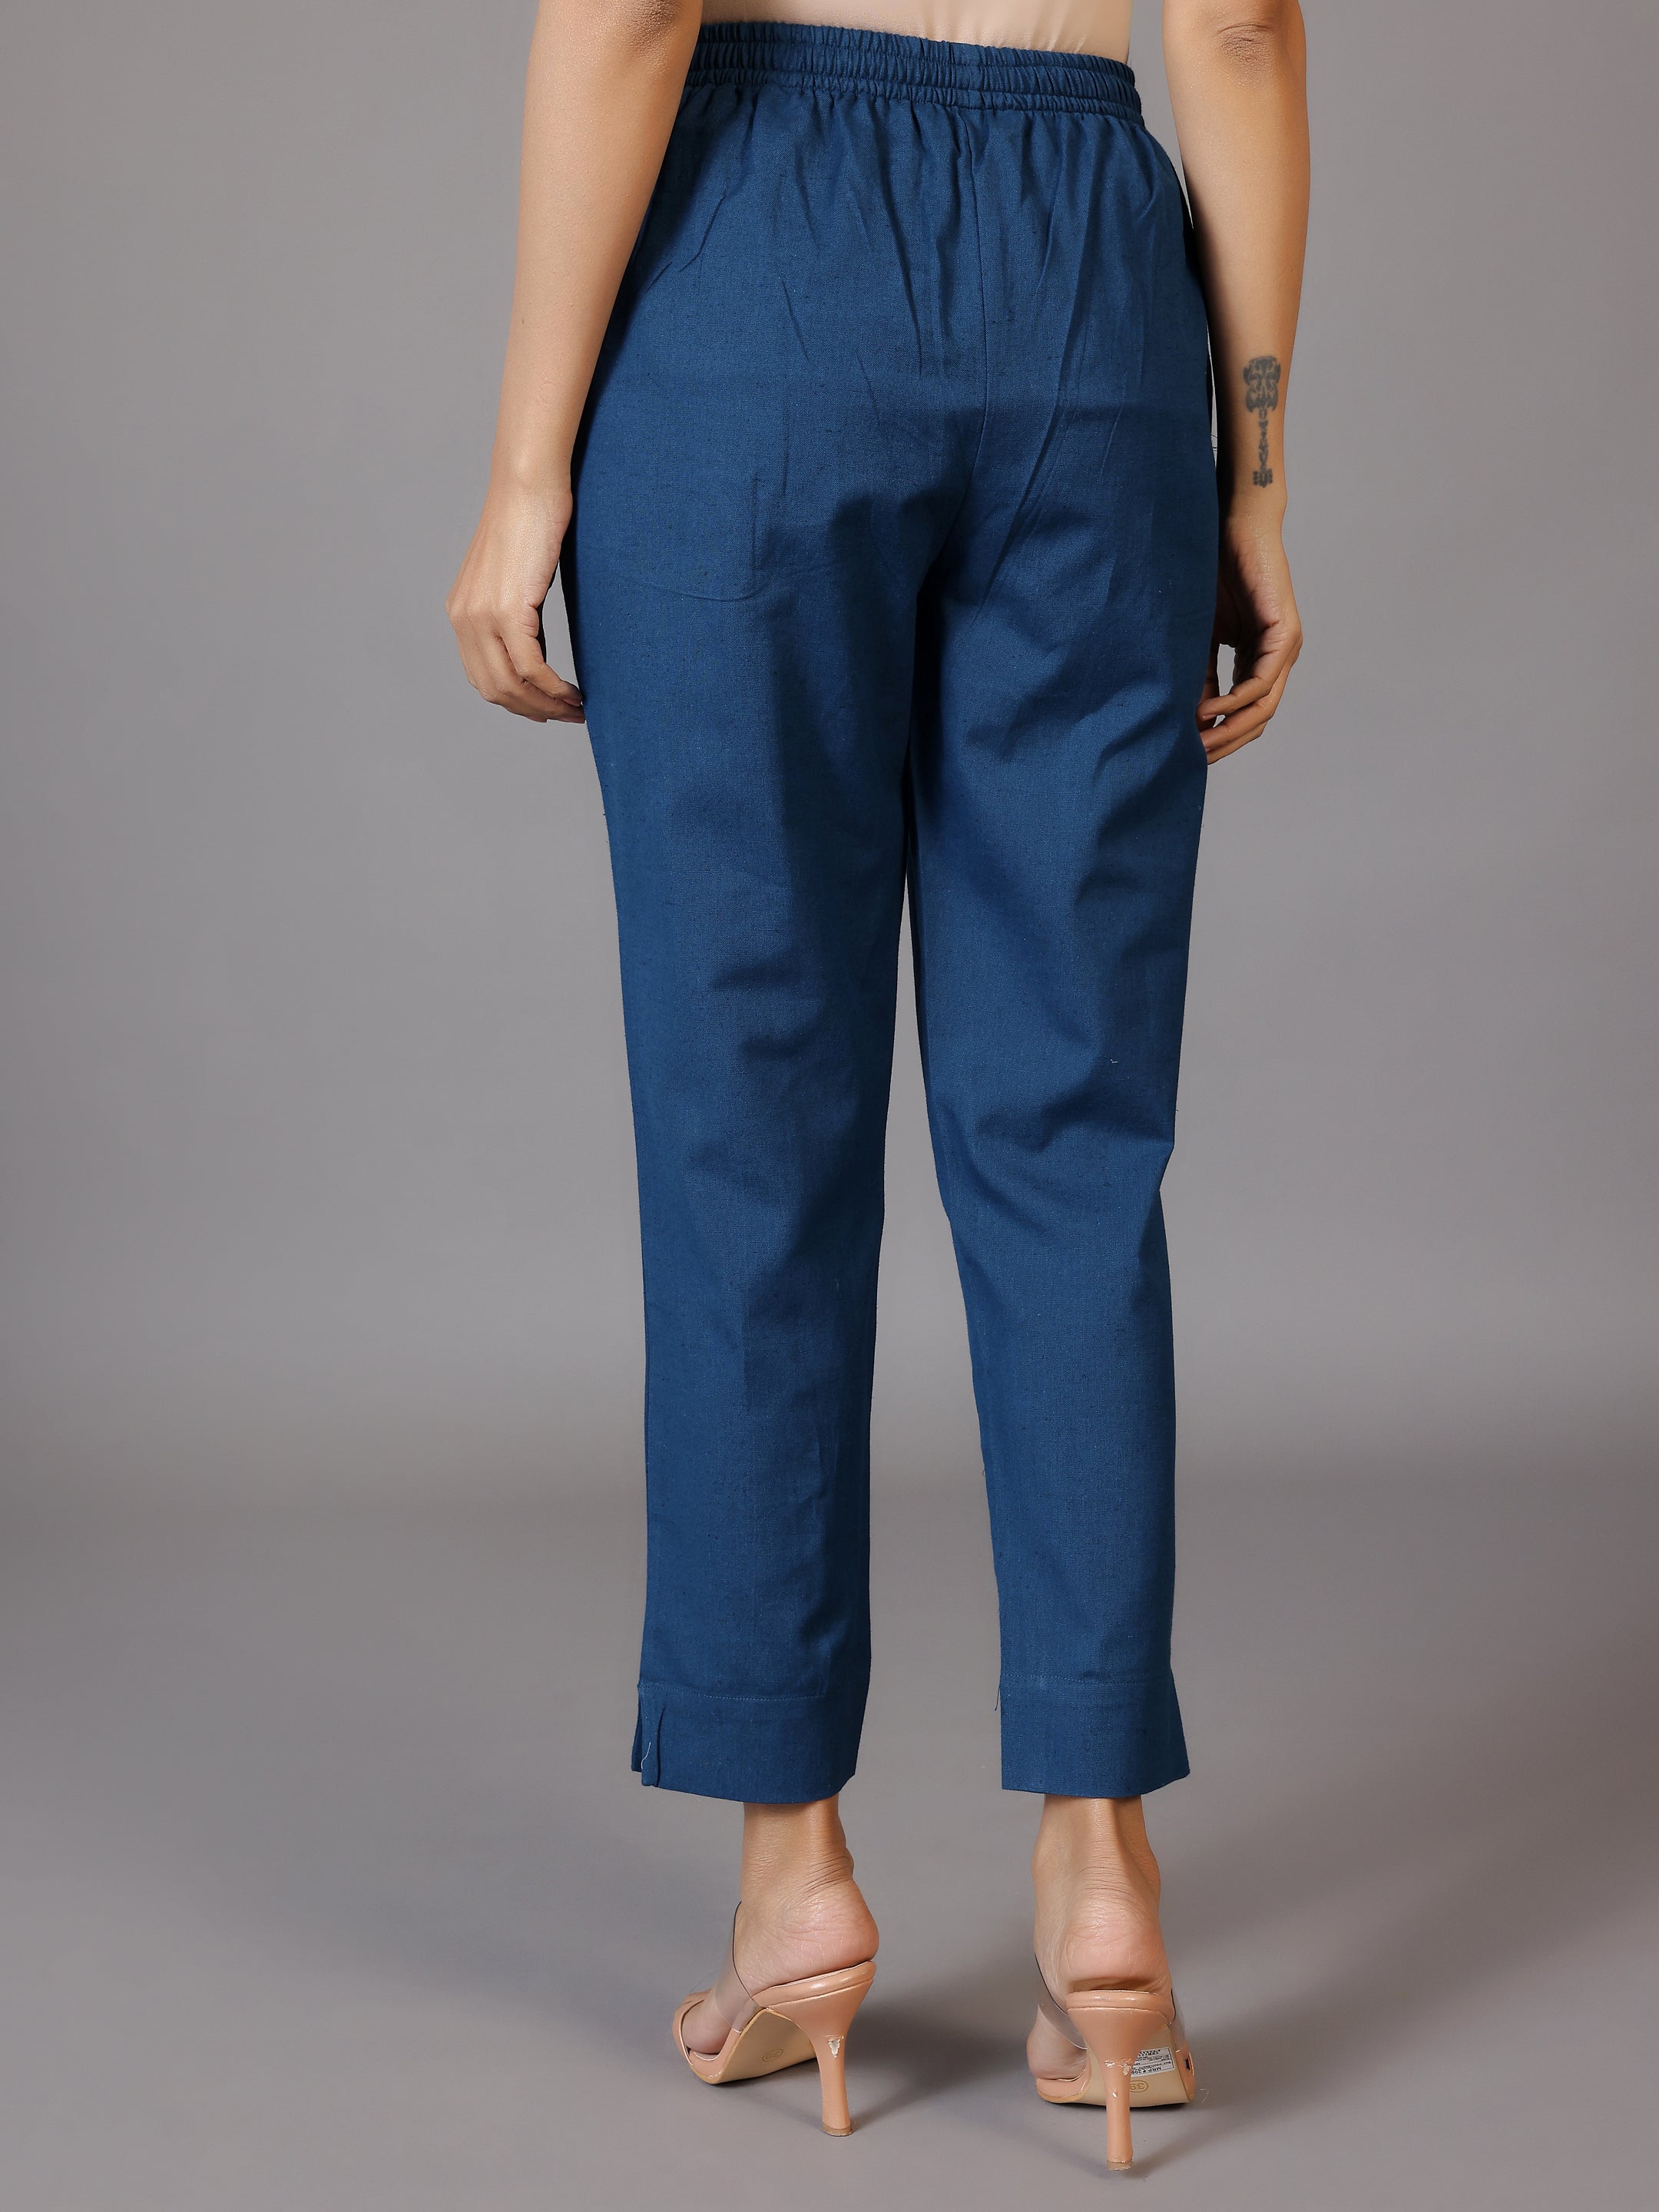 Teal Solid Cotton Straight Fit Trousers